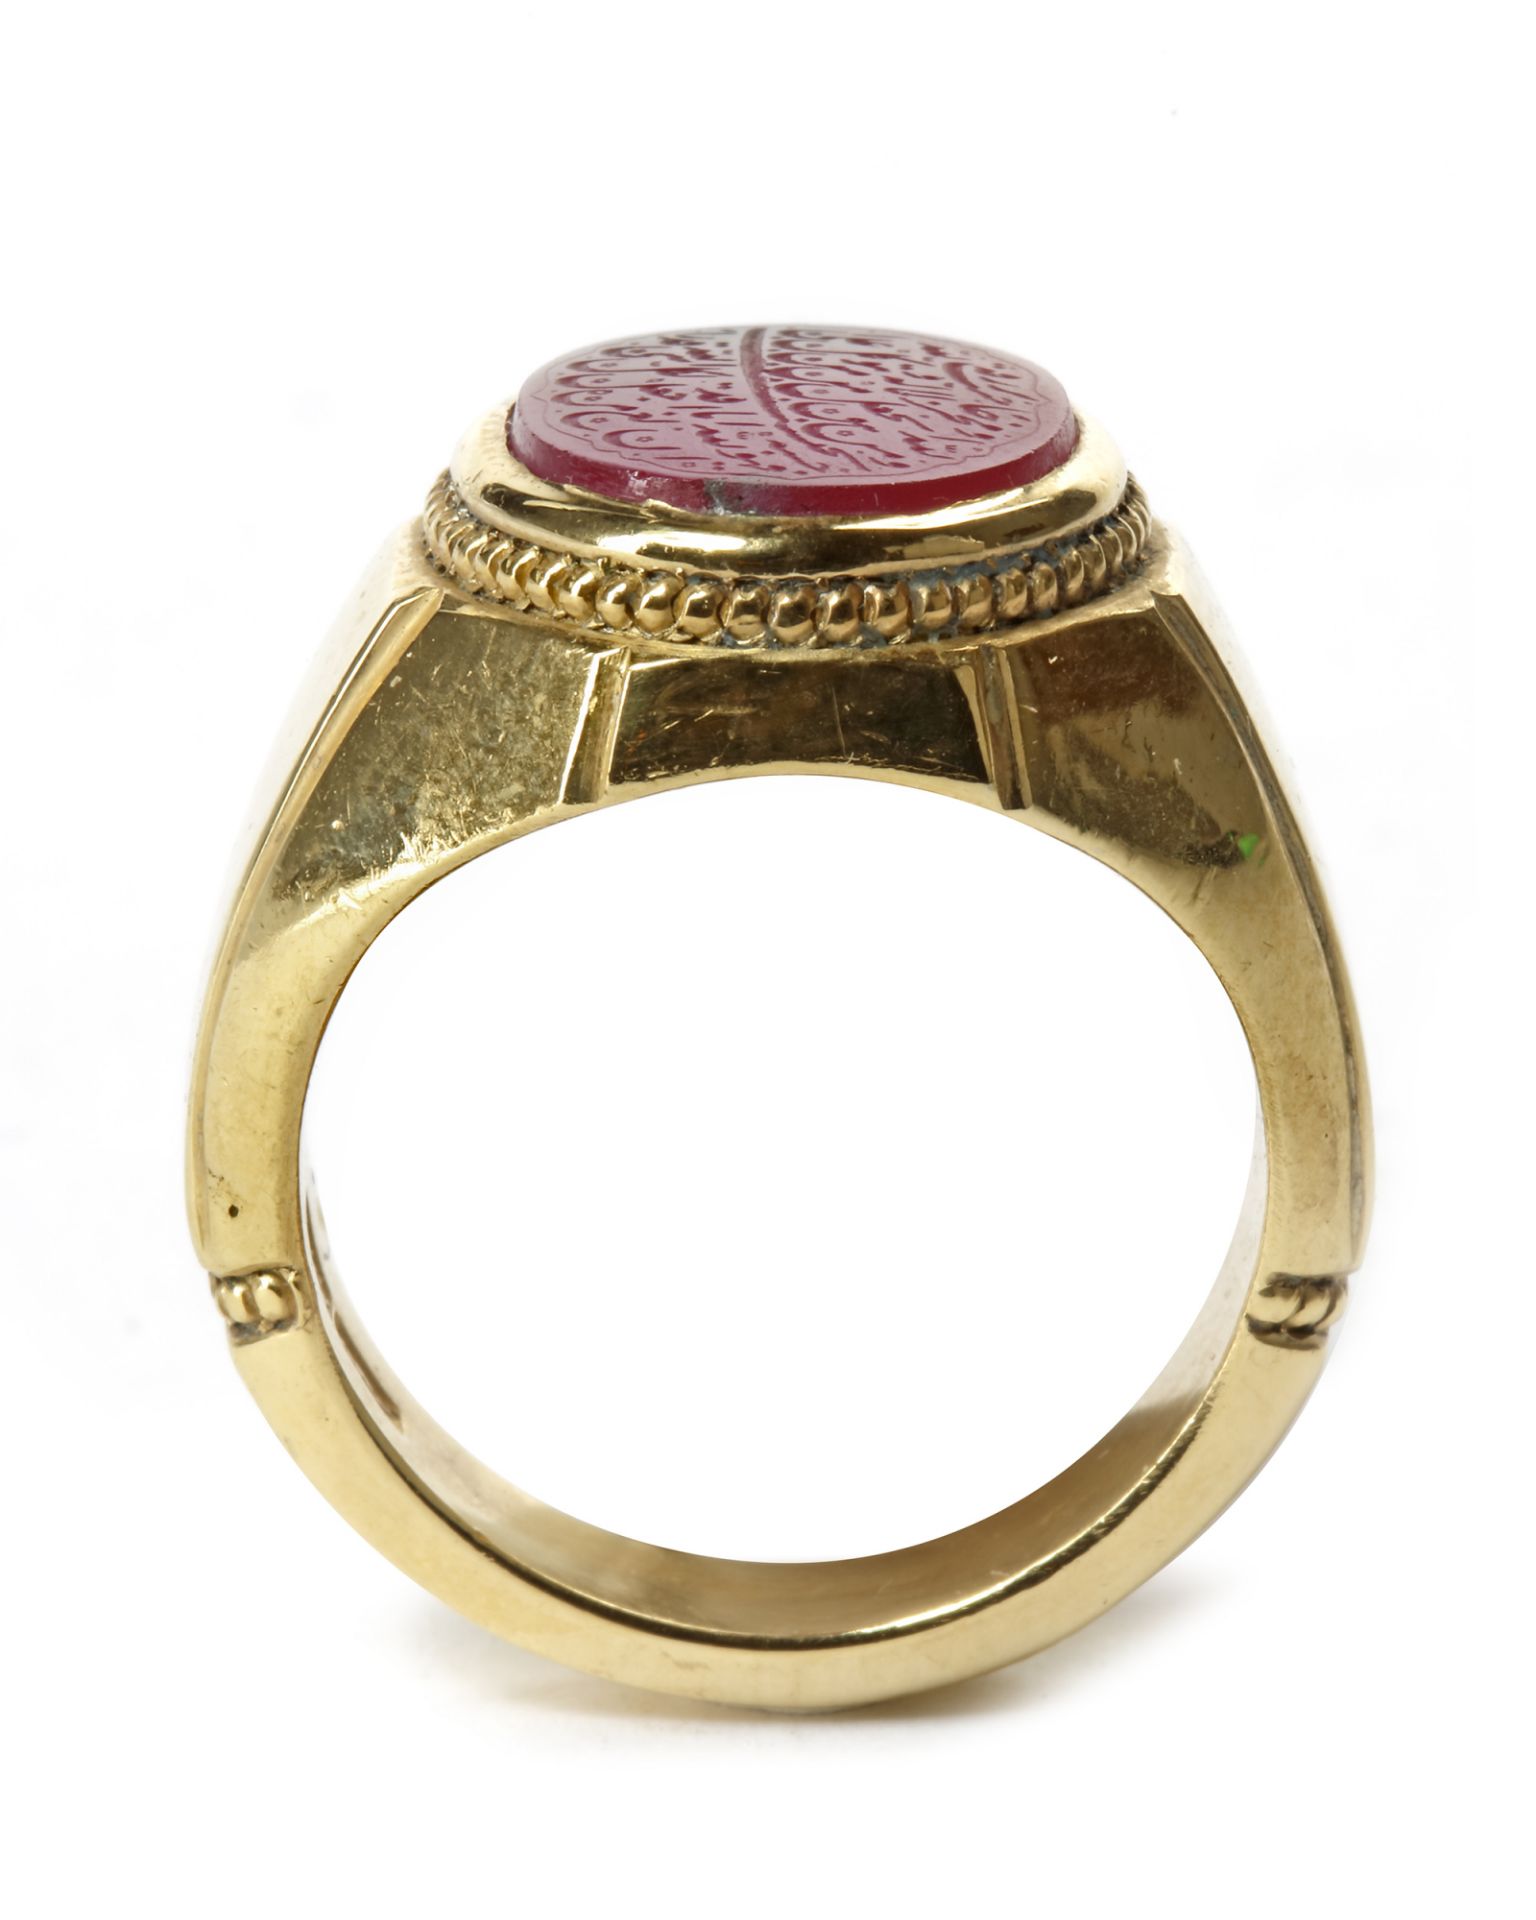 A MUGHAL RUBY AND GILT SILVER RING, CIRCA 1800 - Image 7 of 8